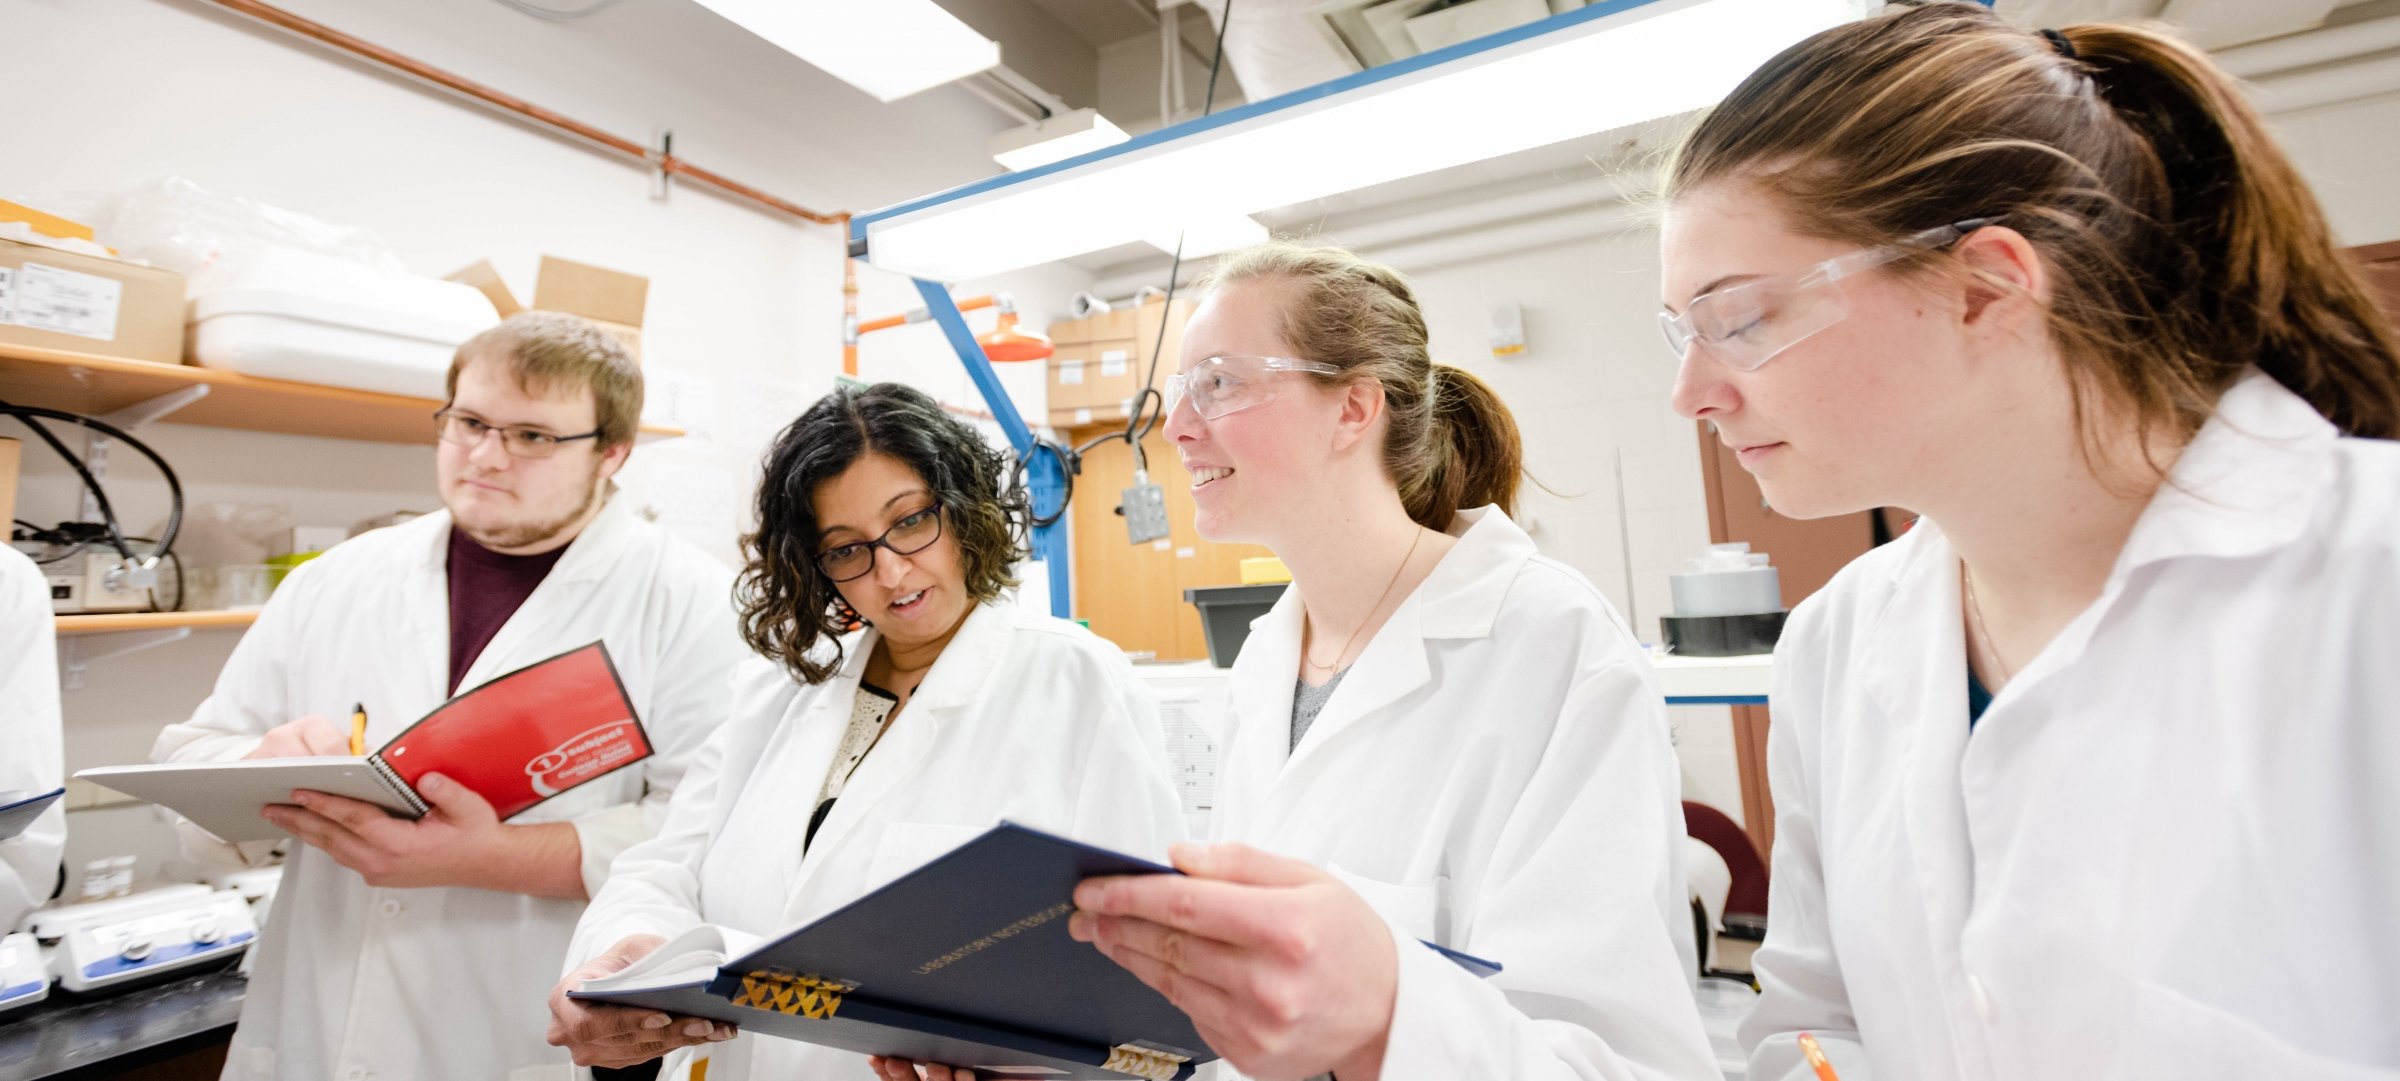 Professor and three students reviewing notes in a lab.